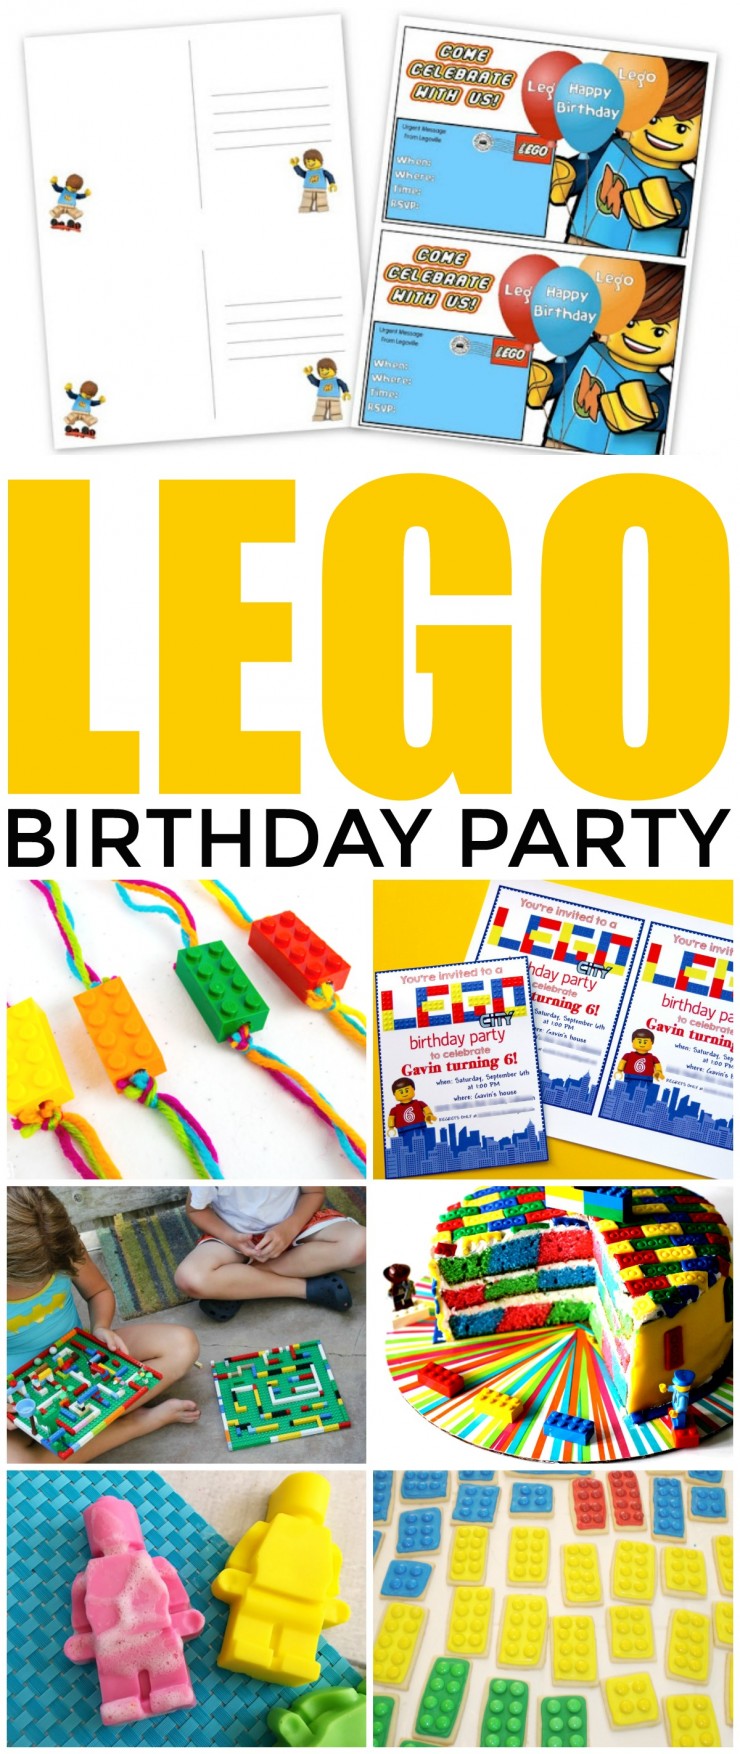 How to Throw the Ultimate LEGO Birthday Party to please any birthday boy or girl. All kids love building with Lego, and so a Lego themed birthday party is a natural choice. Check out these 25 ideas that will help you throw an amazing Lego themed party for boys or girls!